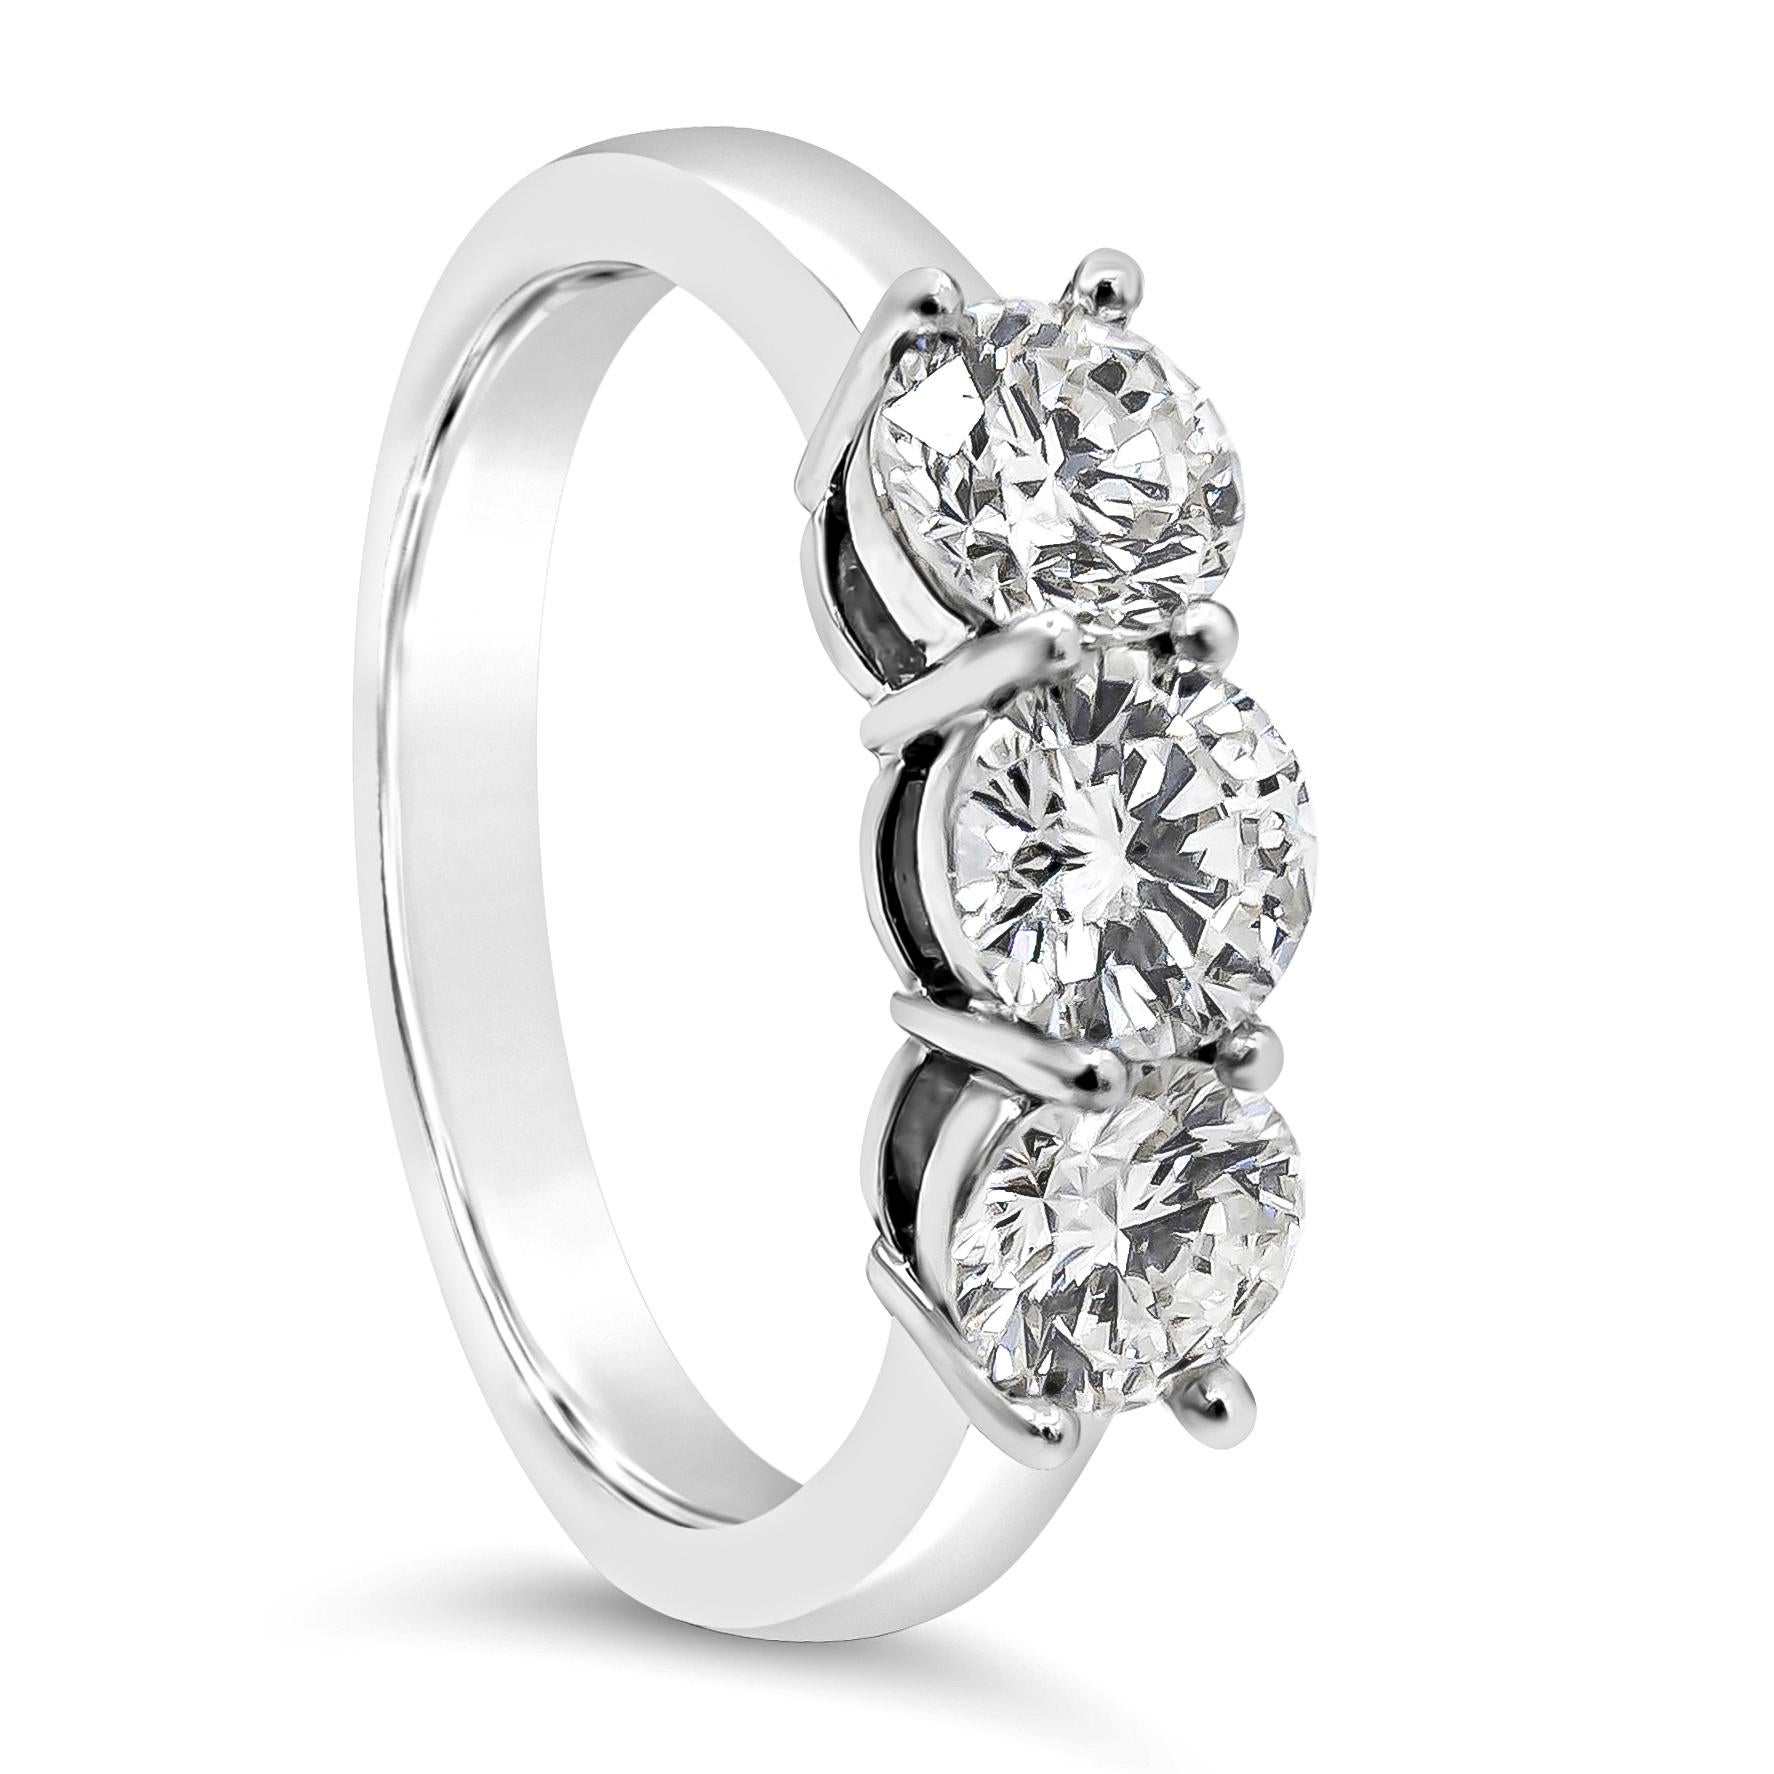 A classy and chic wedding band showcasing three round brilliant diamonds set in a timeless shared prong setting in a polished platinum mounting weighing 1.63 carats total, J color, VS in clarity. Size 7.25 US resizable upon request.

Style available